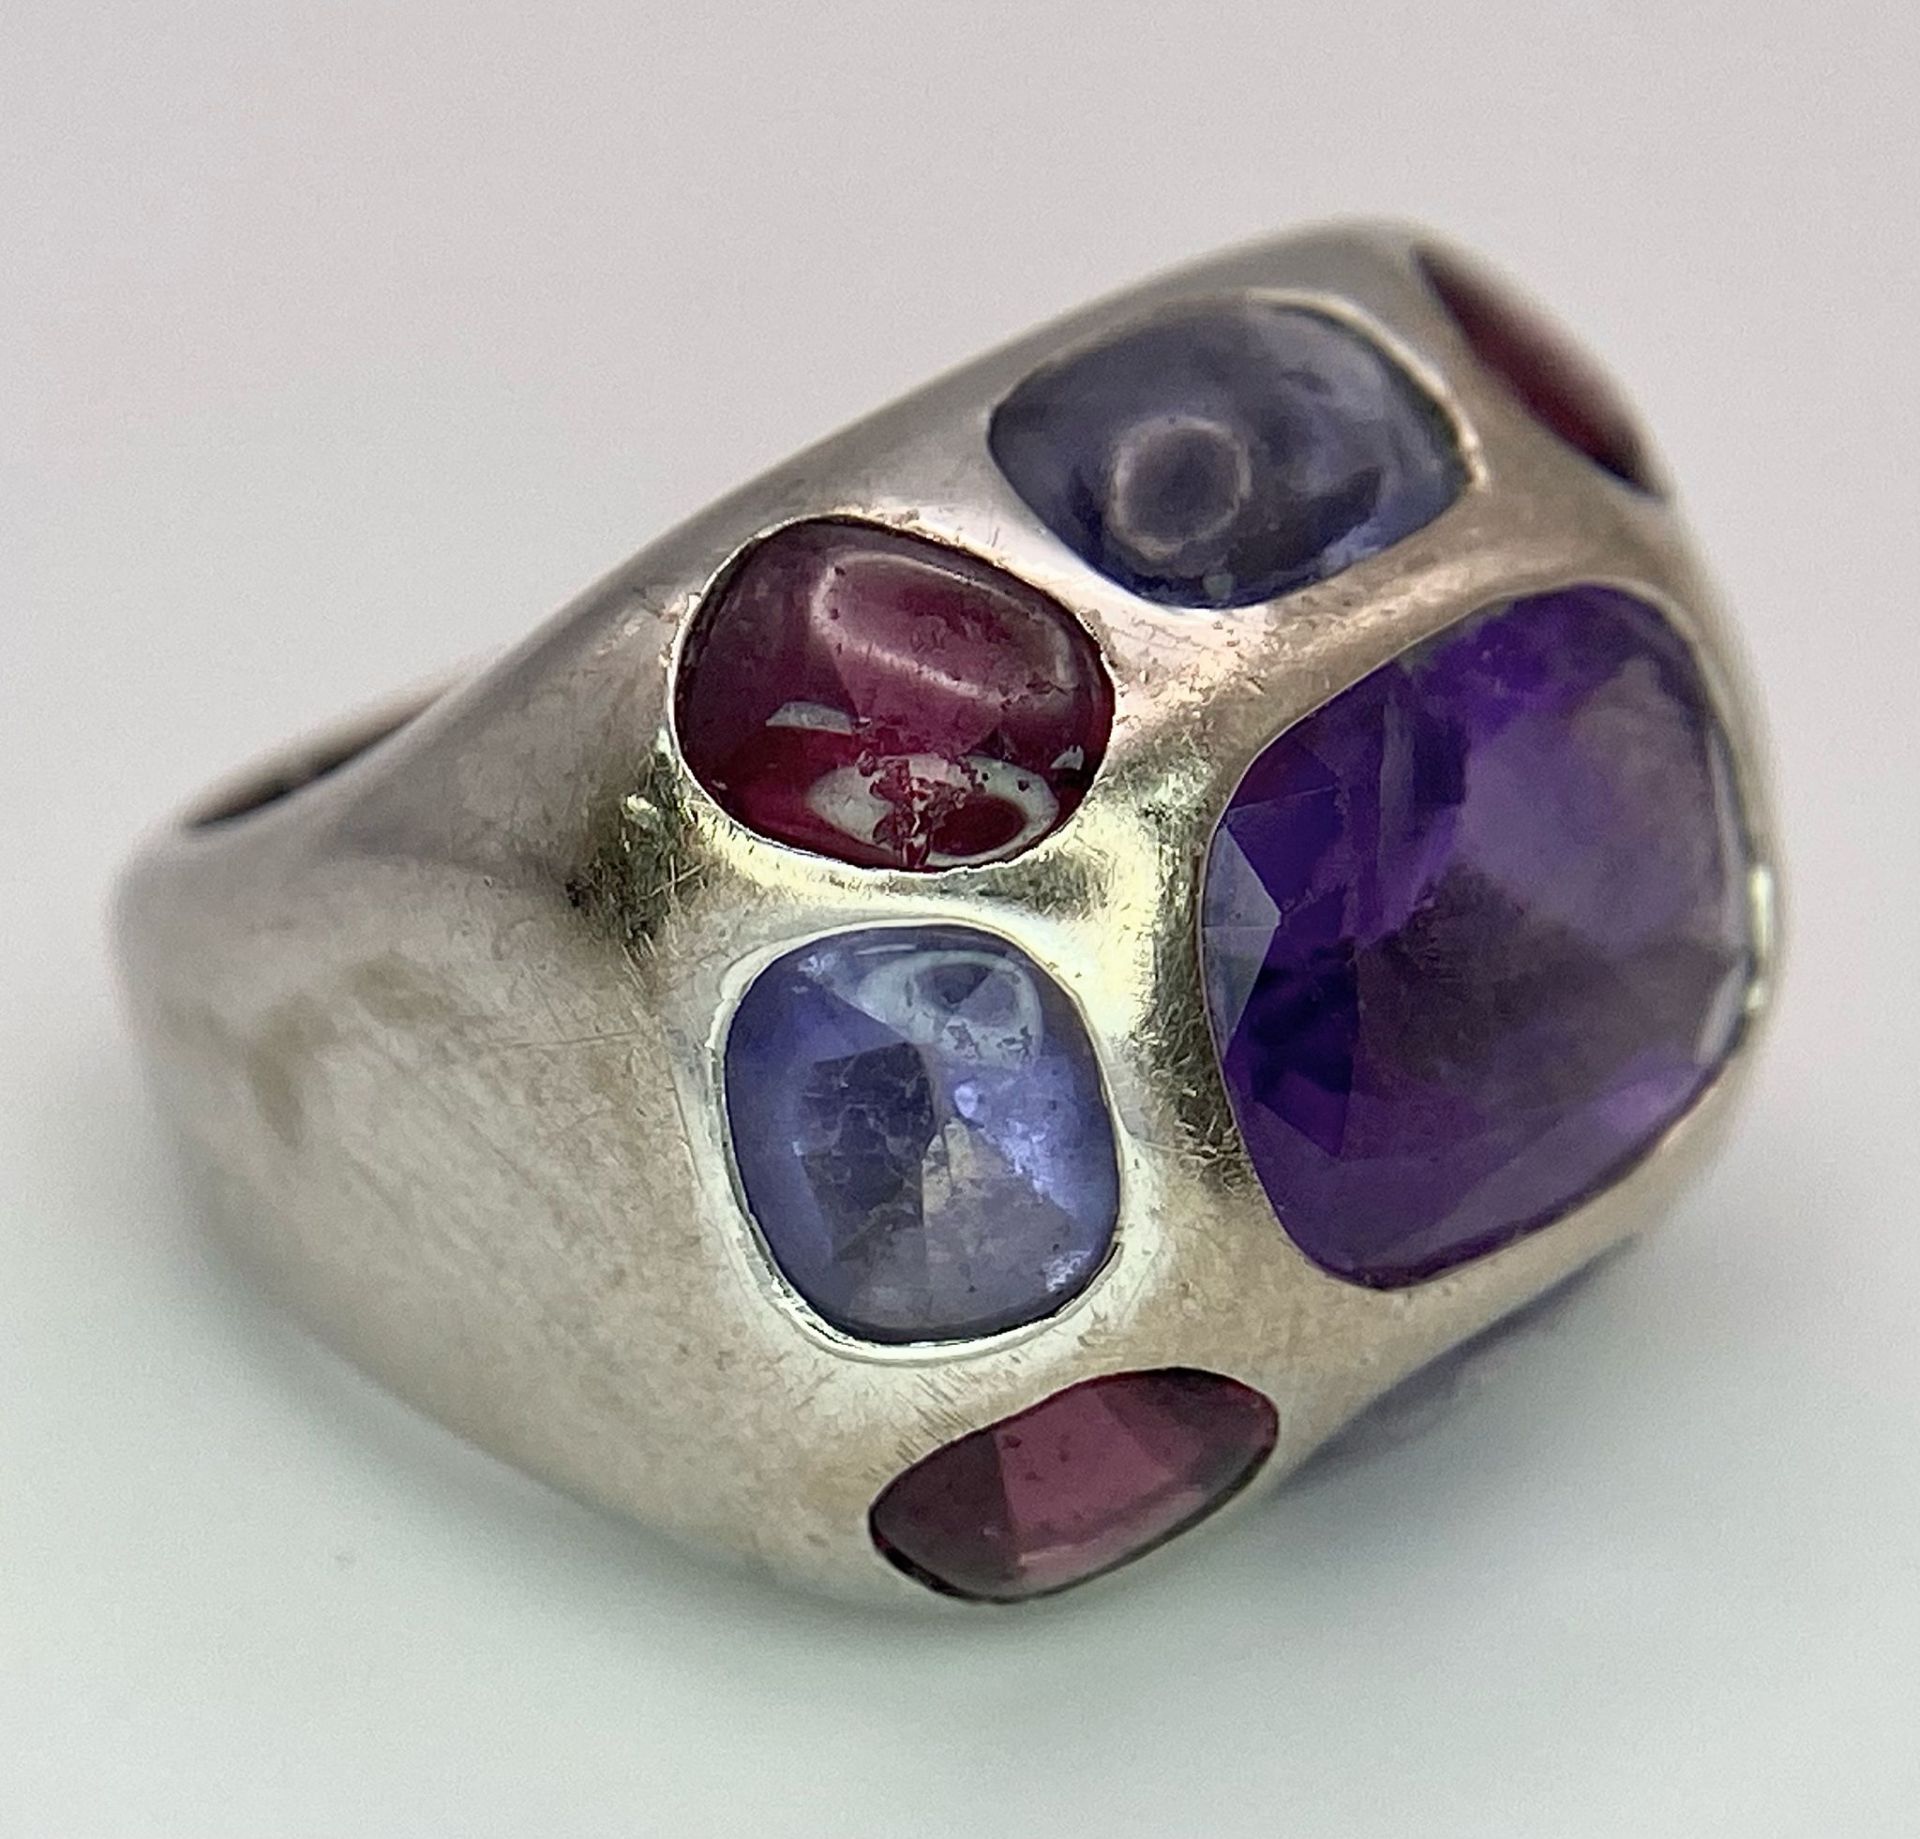 A Chanel Designer 18K White Gold and Amethyst and Garnet Ring. Rectangular cut central amethyst with - Image 4 of 13